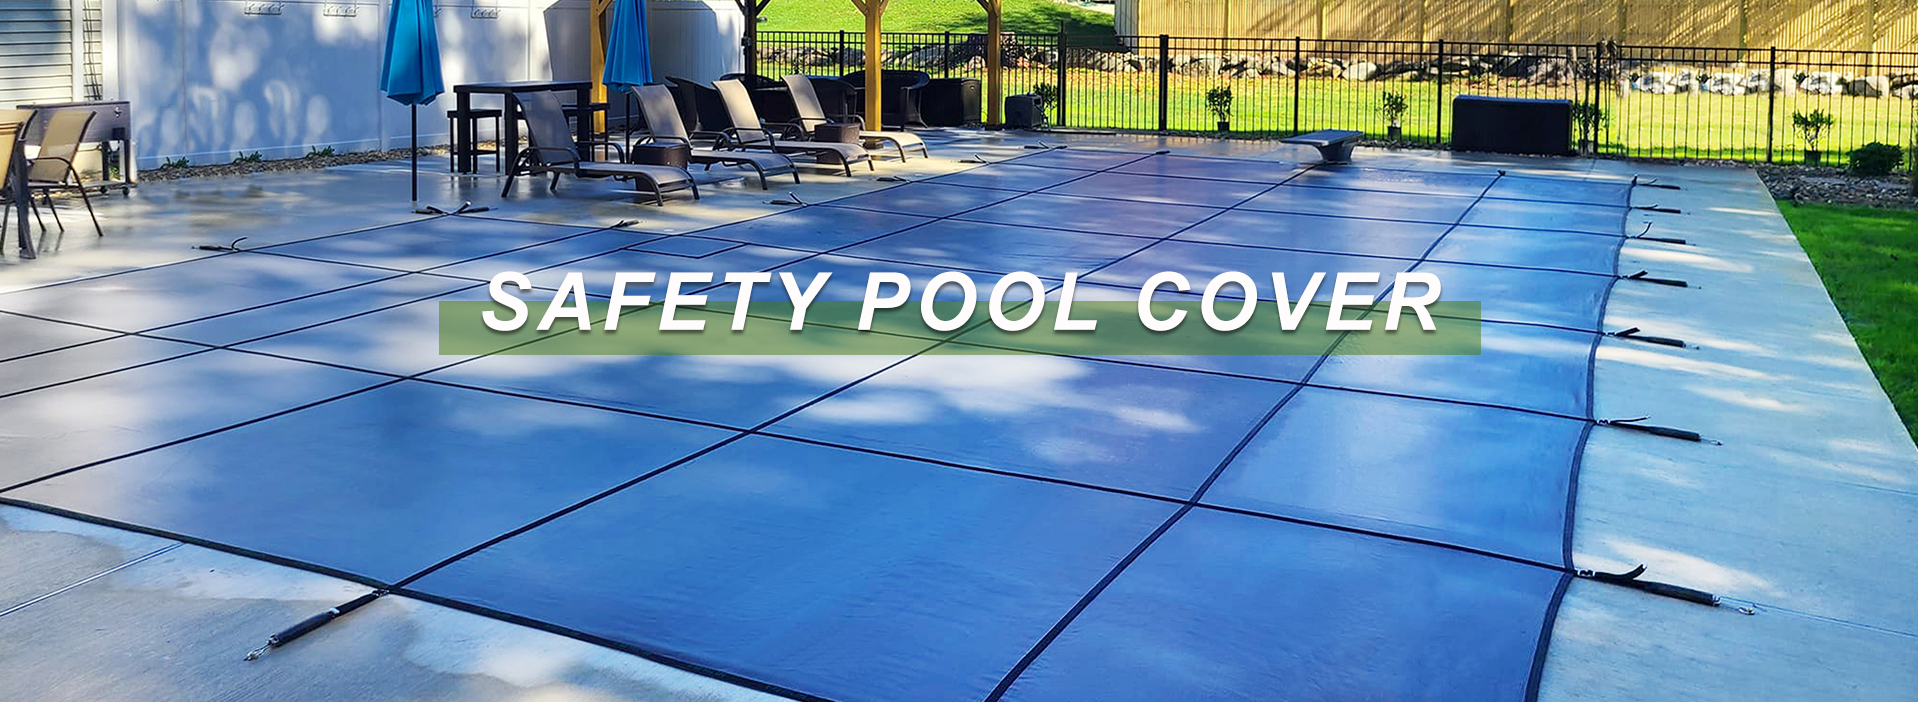 safety pool cover